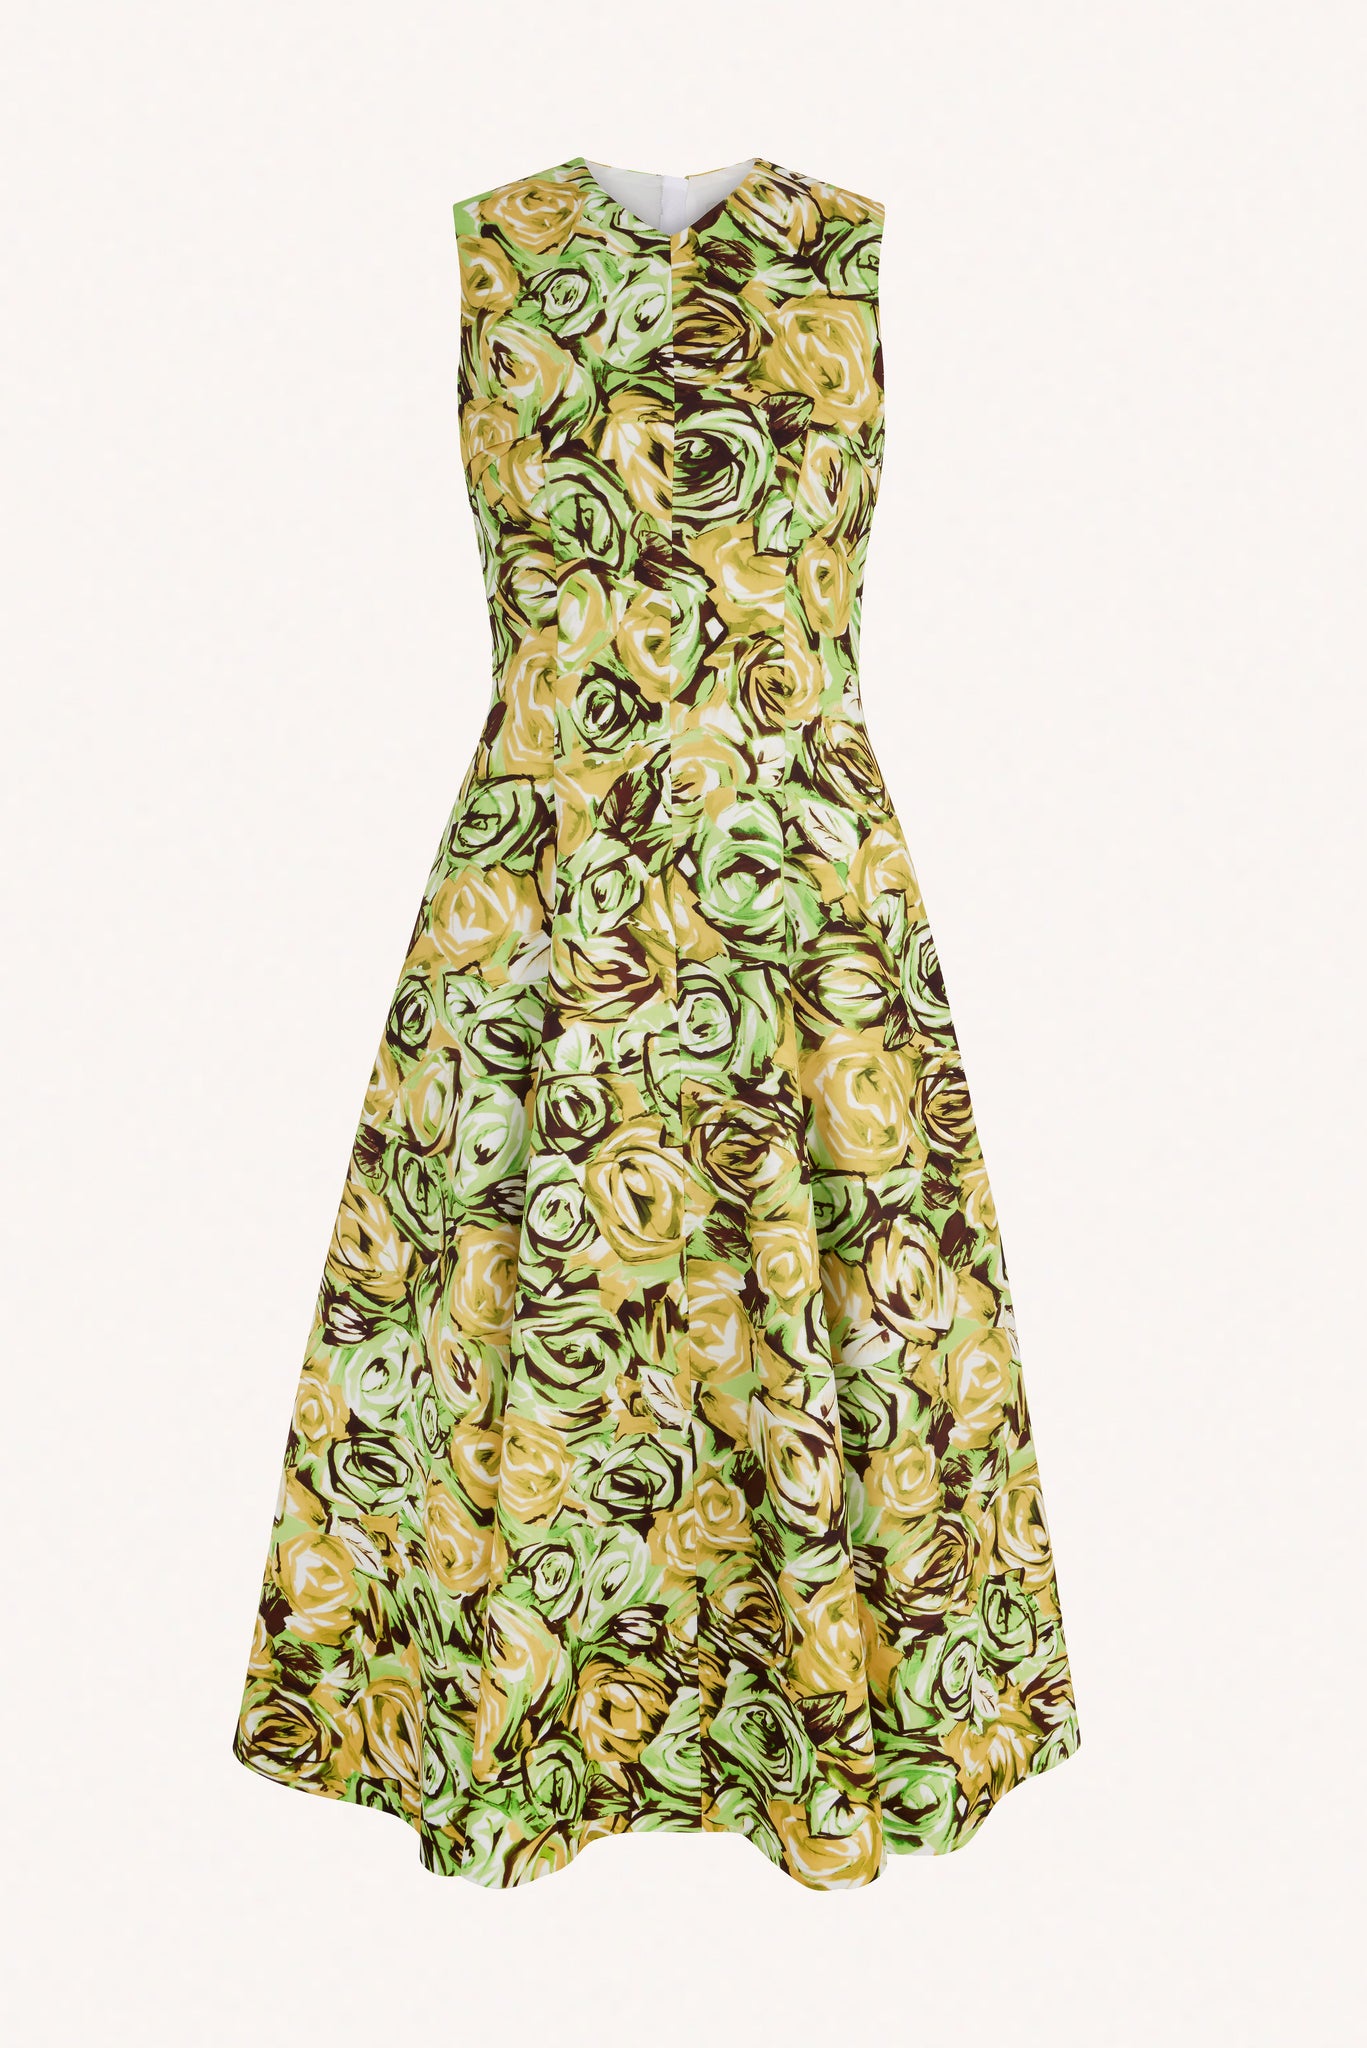 Madi Dress In Abstract Green And Lemon Rose Printed Twill - Emilia Wickstead